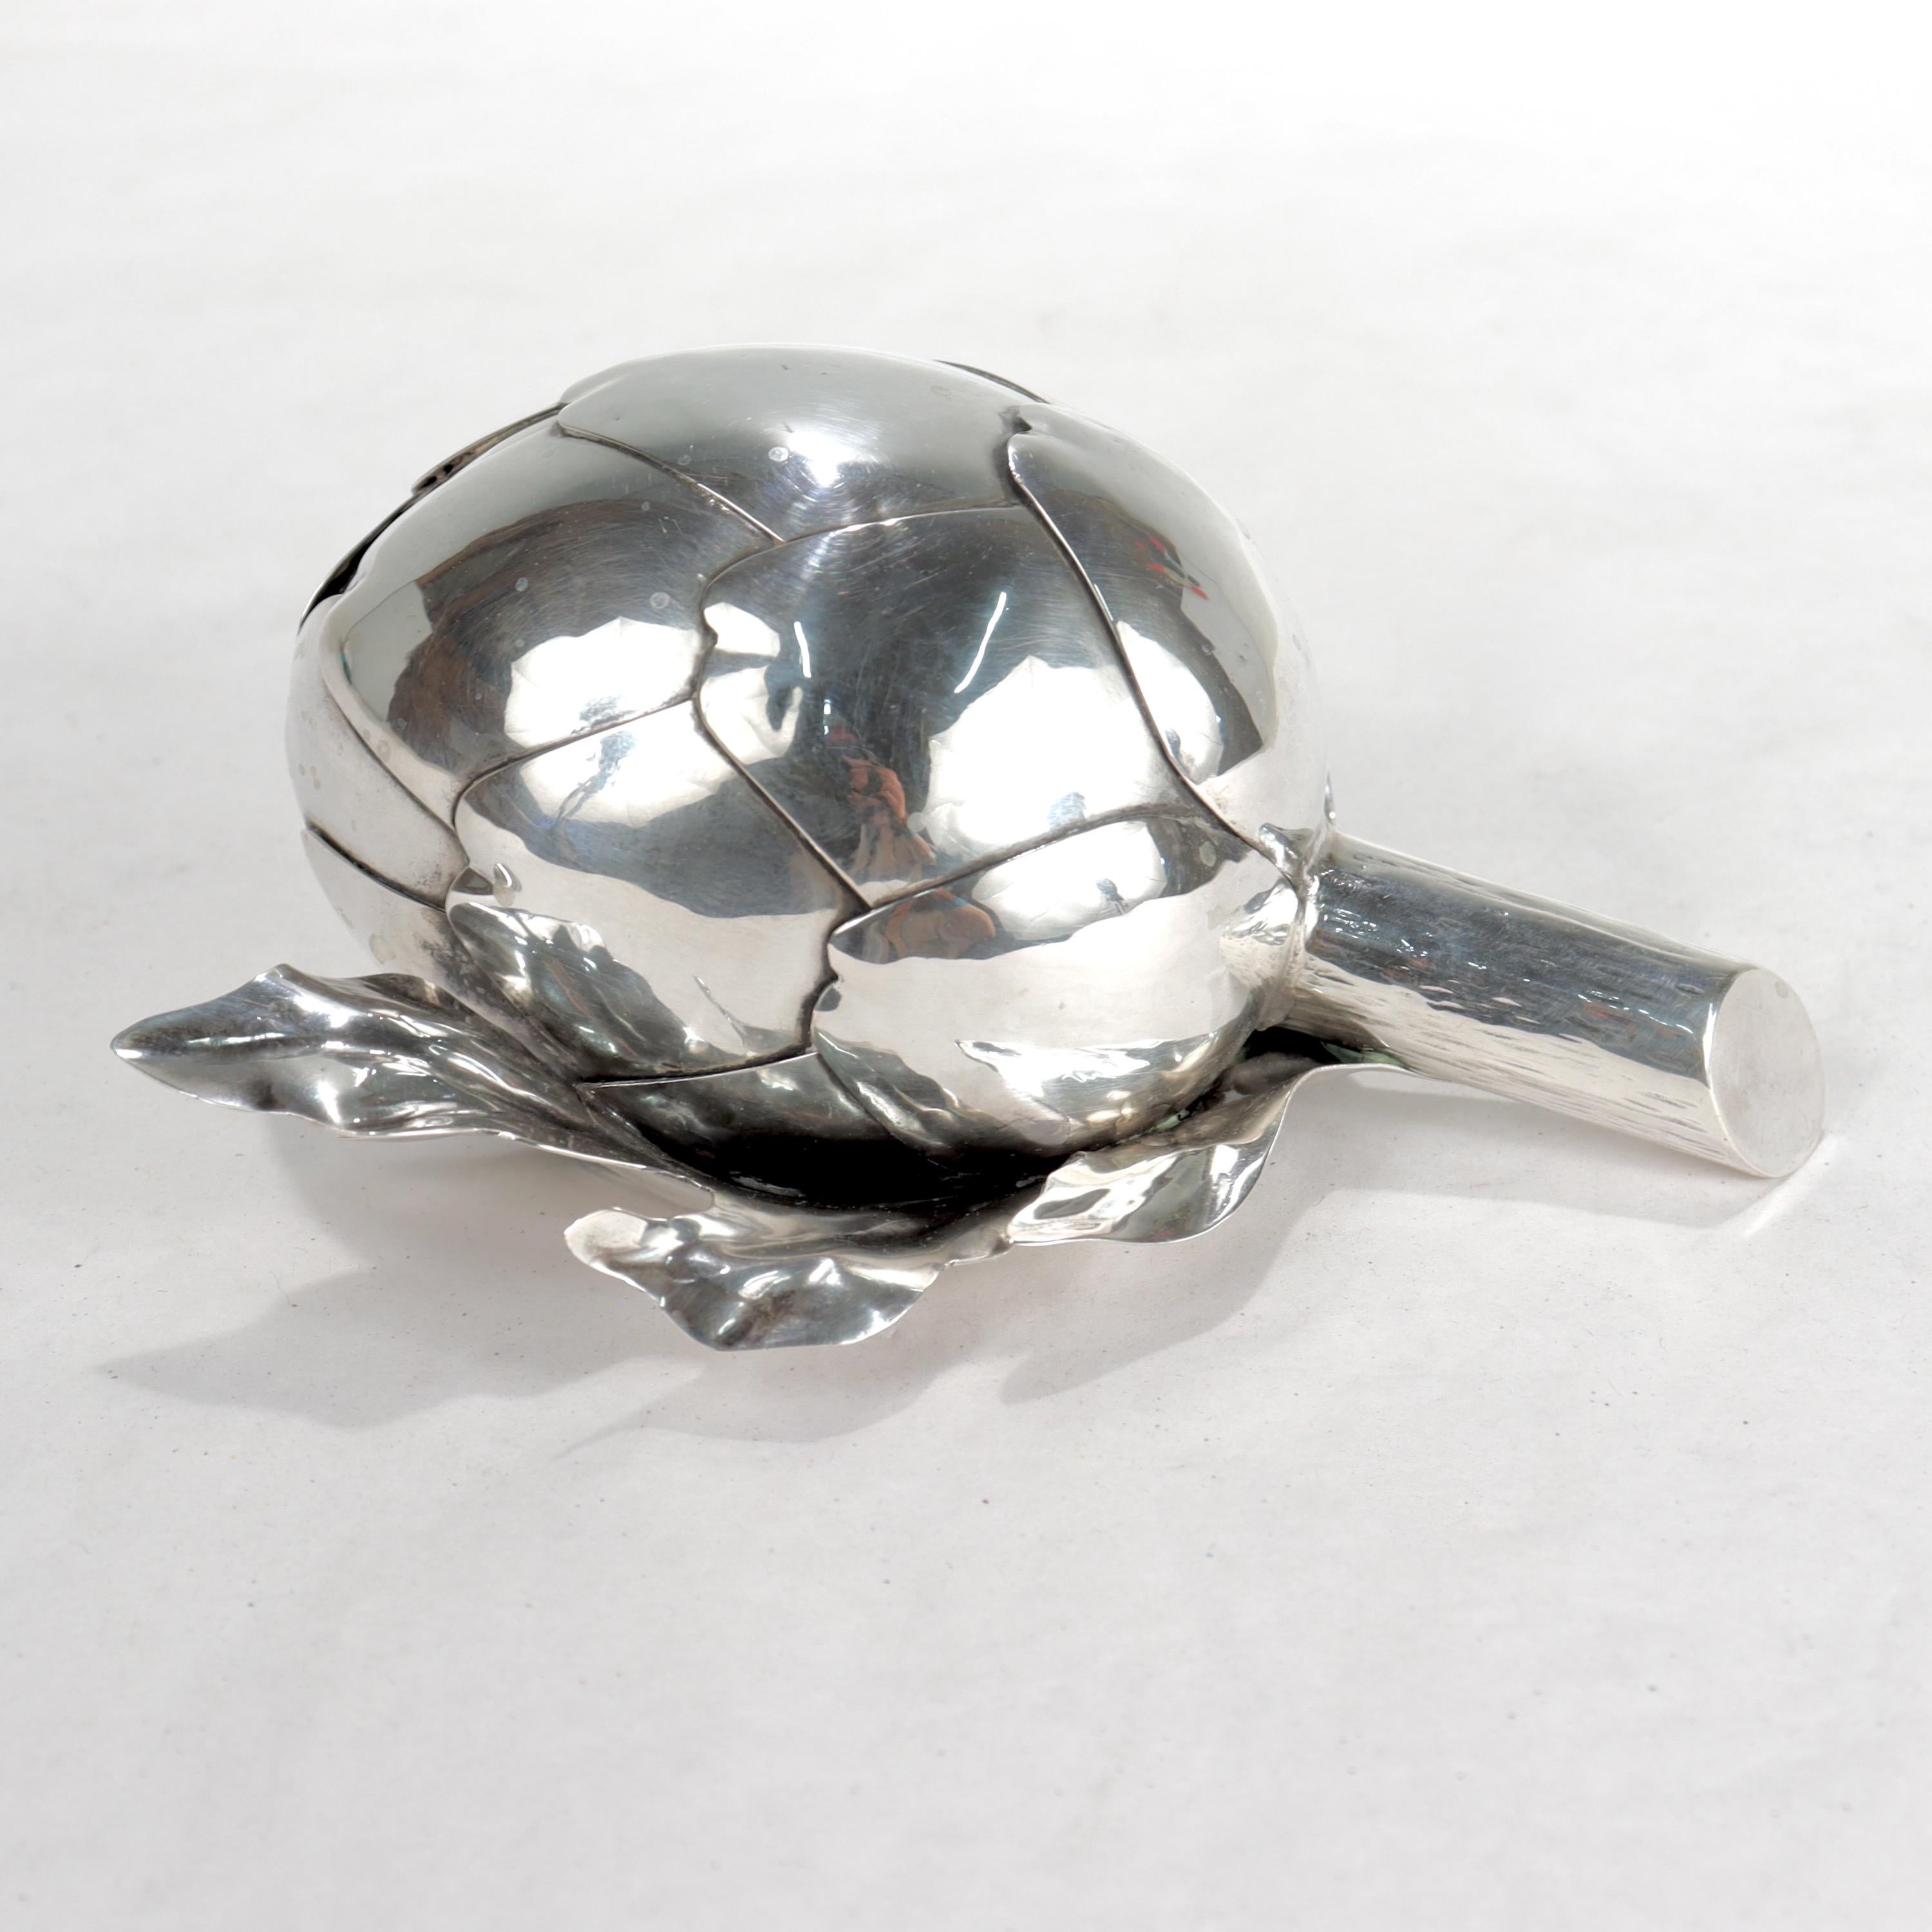 A fine figural table lighter.
 
In .800 fine silver. 

By Mario Buccellati.

In the form of a realistic artichoke complete with leaves, petals, and stem.

The lighter is detachable and fully removable from the artichoke (untested for functionality).